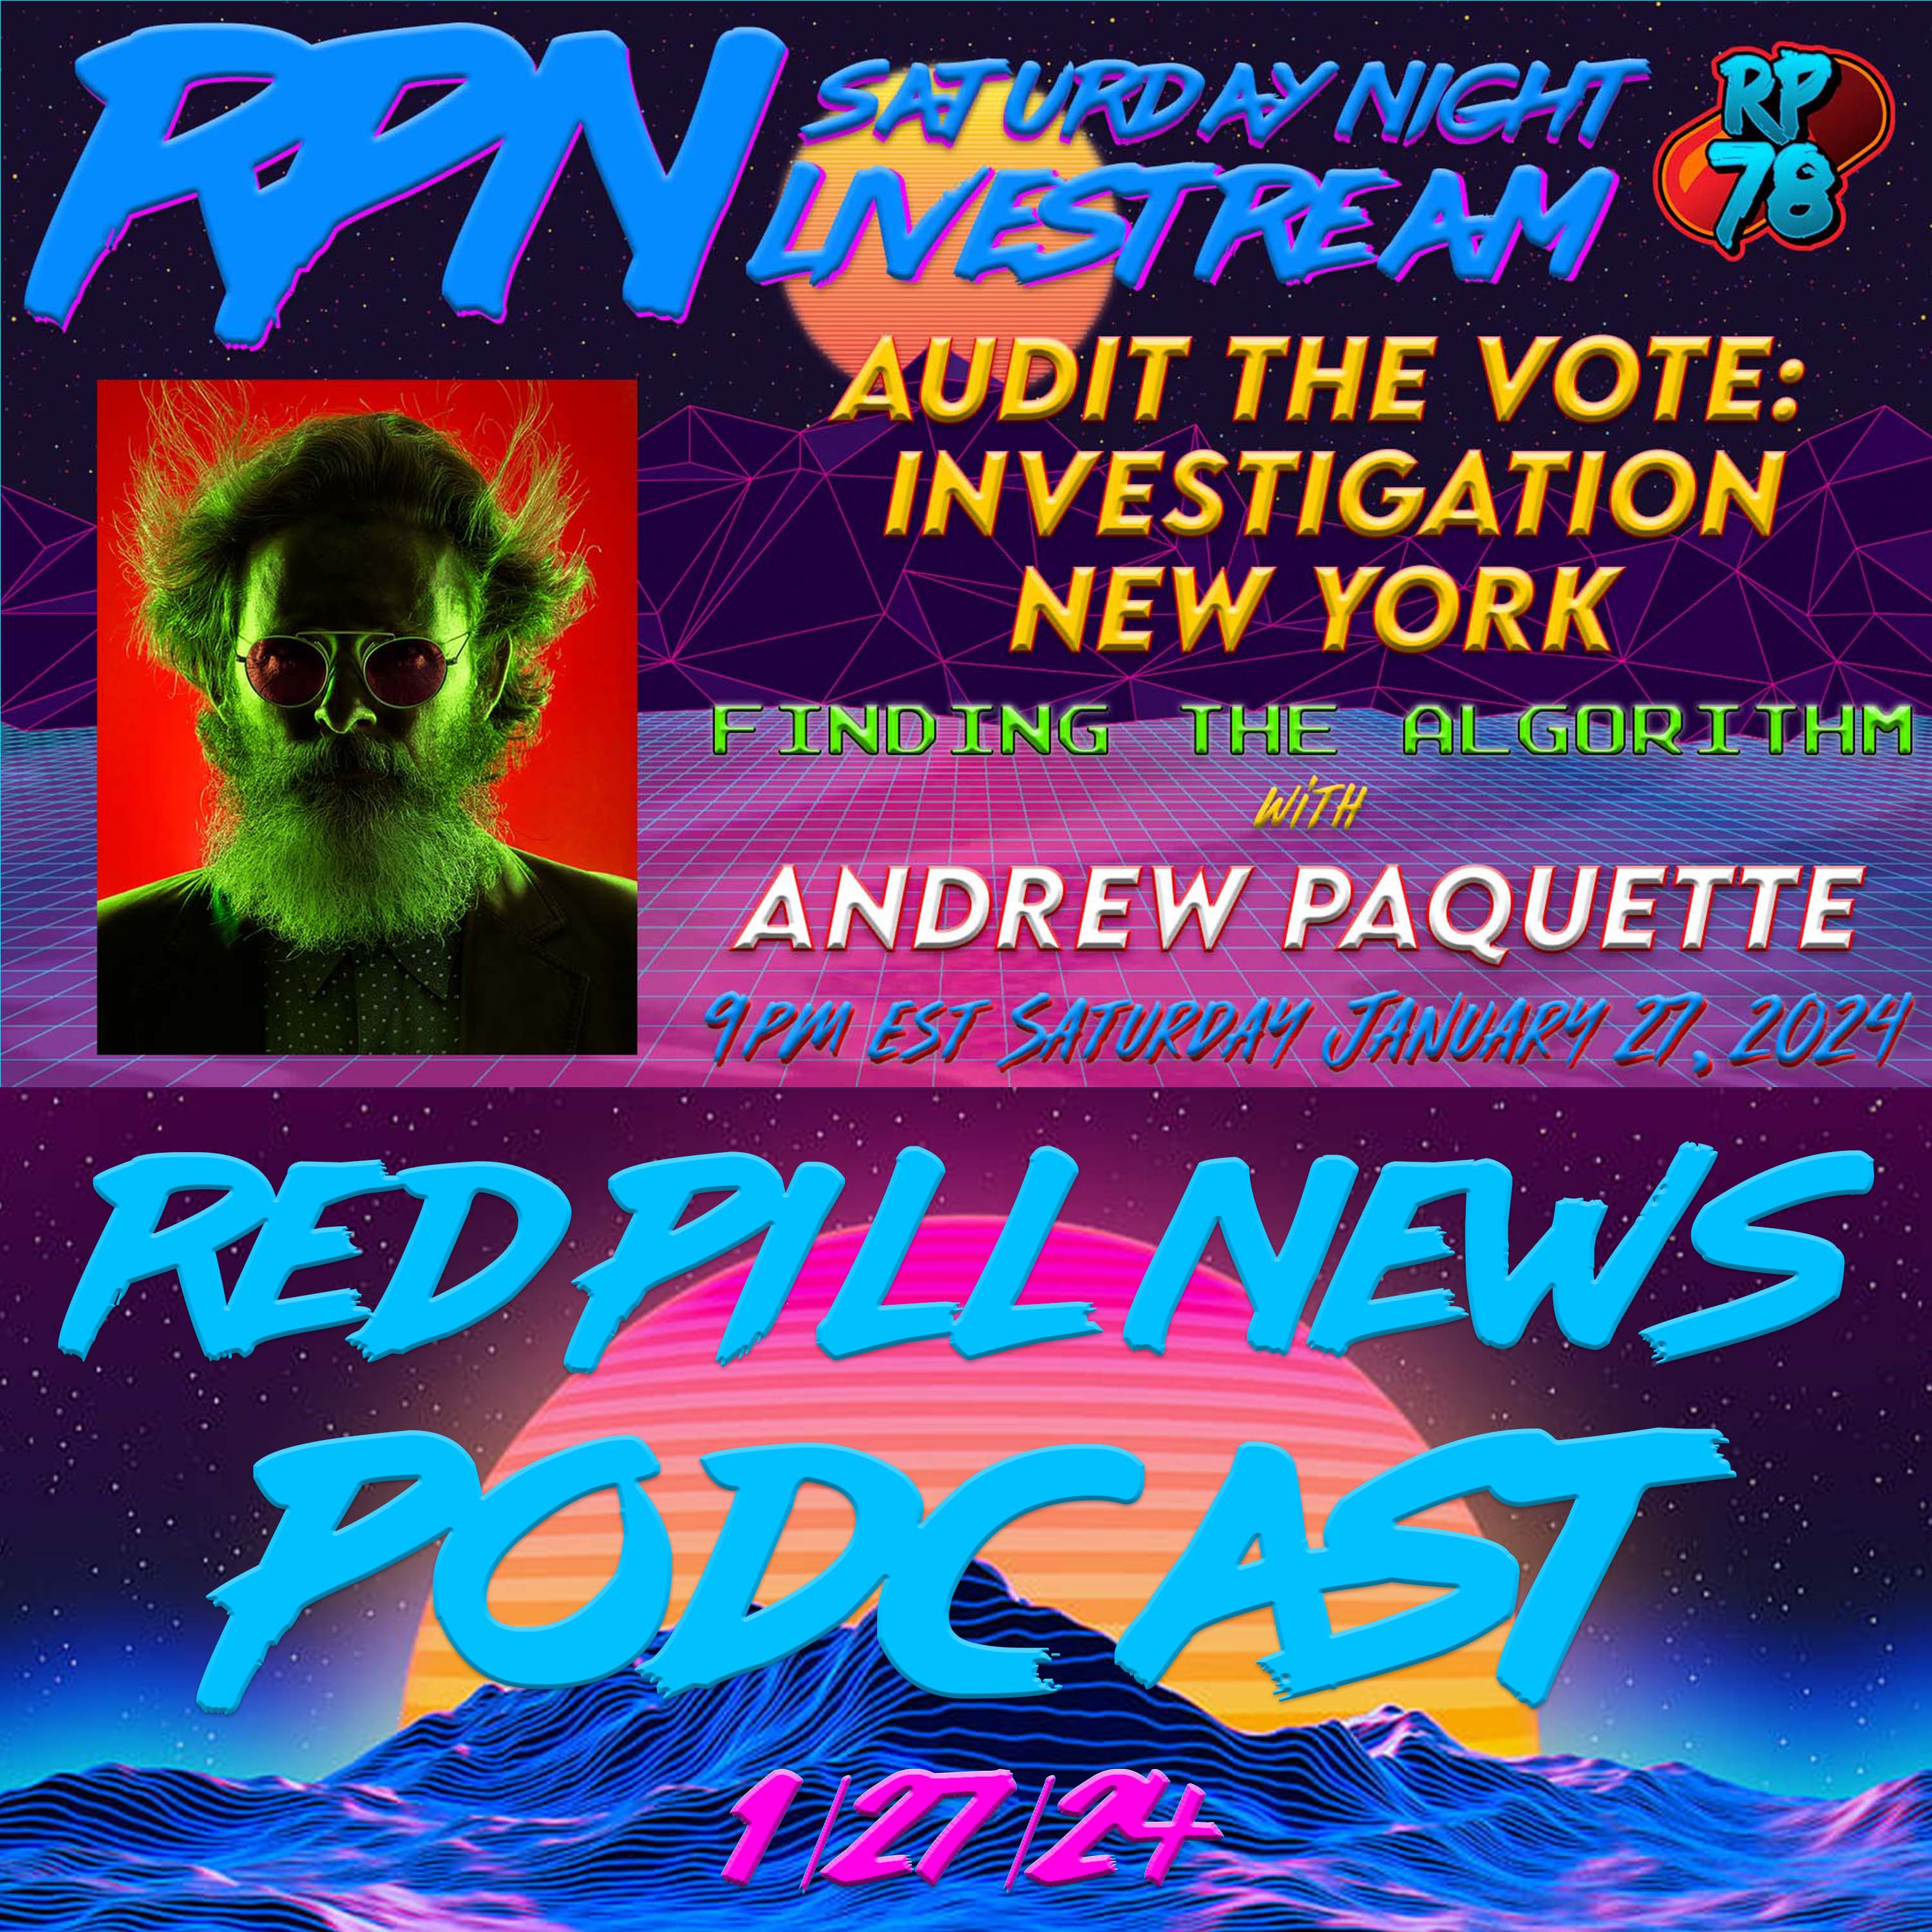 Audit The Vote: Investigation New York featuring Andrew Paquette on Sat. Night Livestream